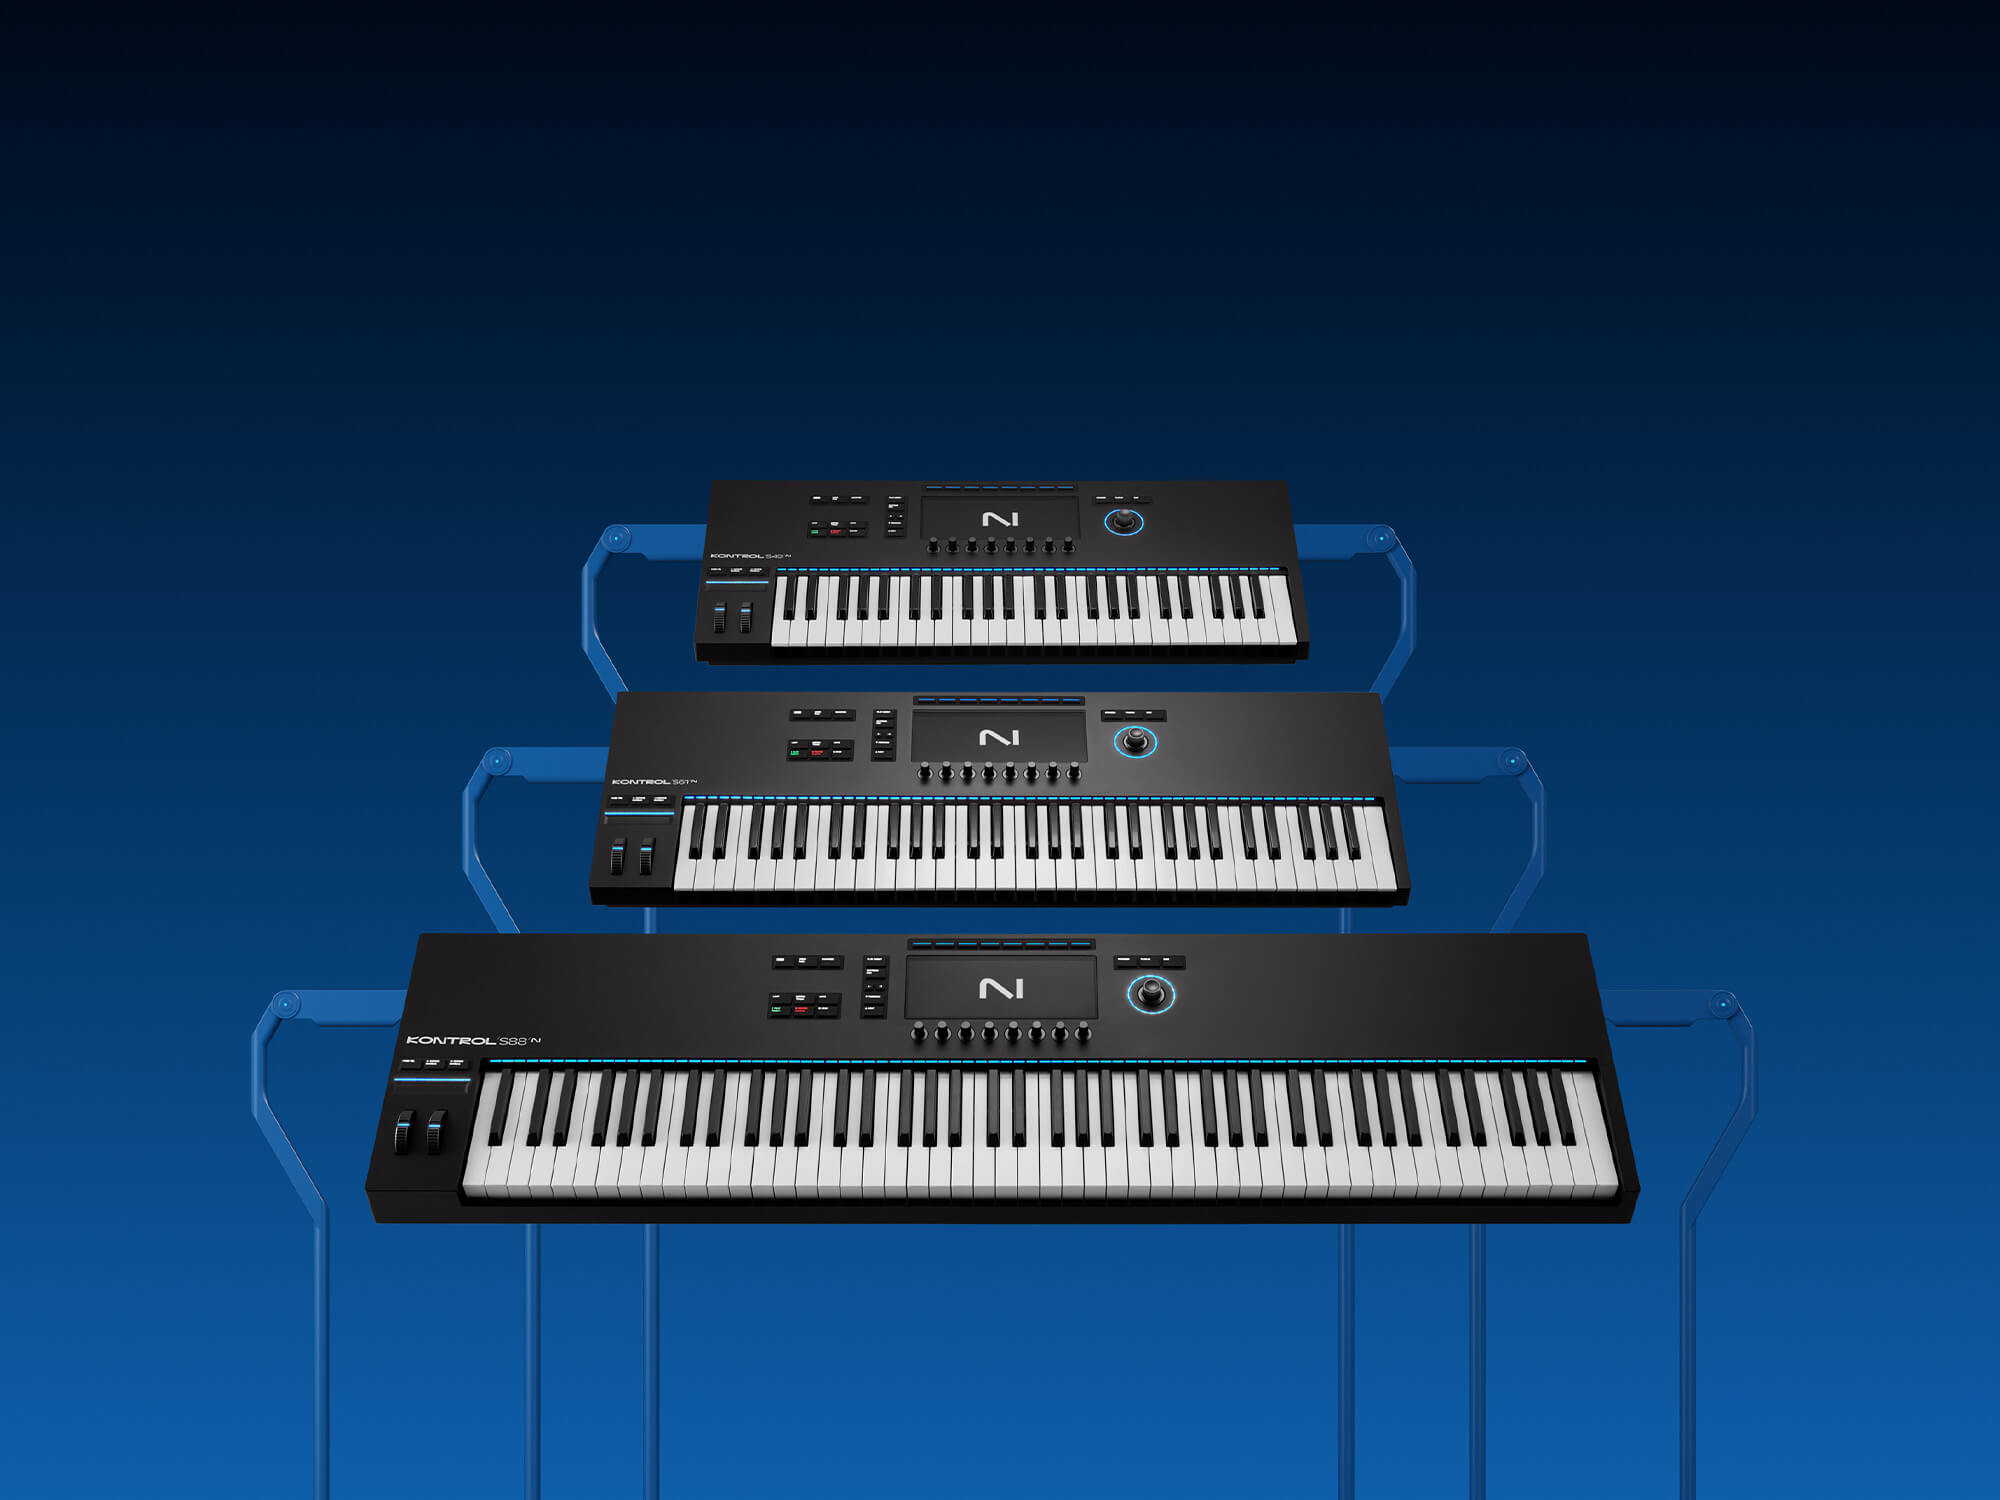 The S-Series MK3 models with a blue background. They're shown in a tier with the smallest and most affordable at the top.